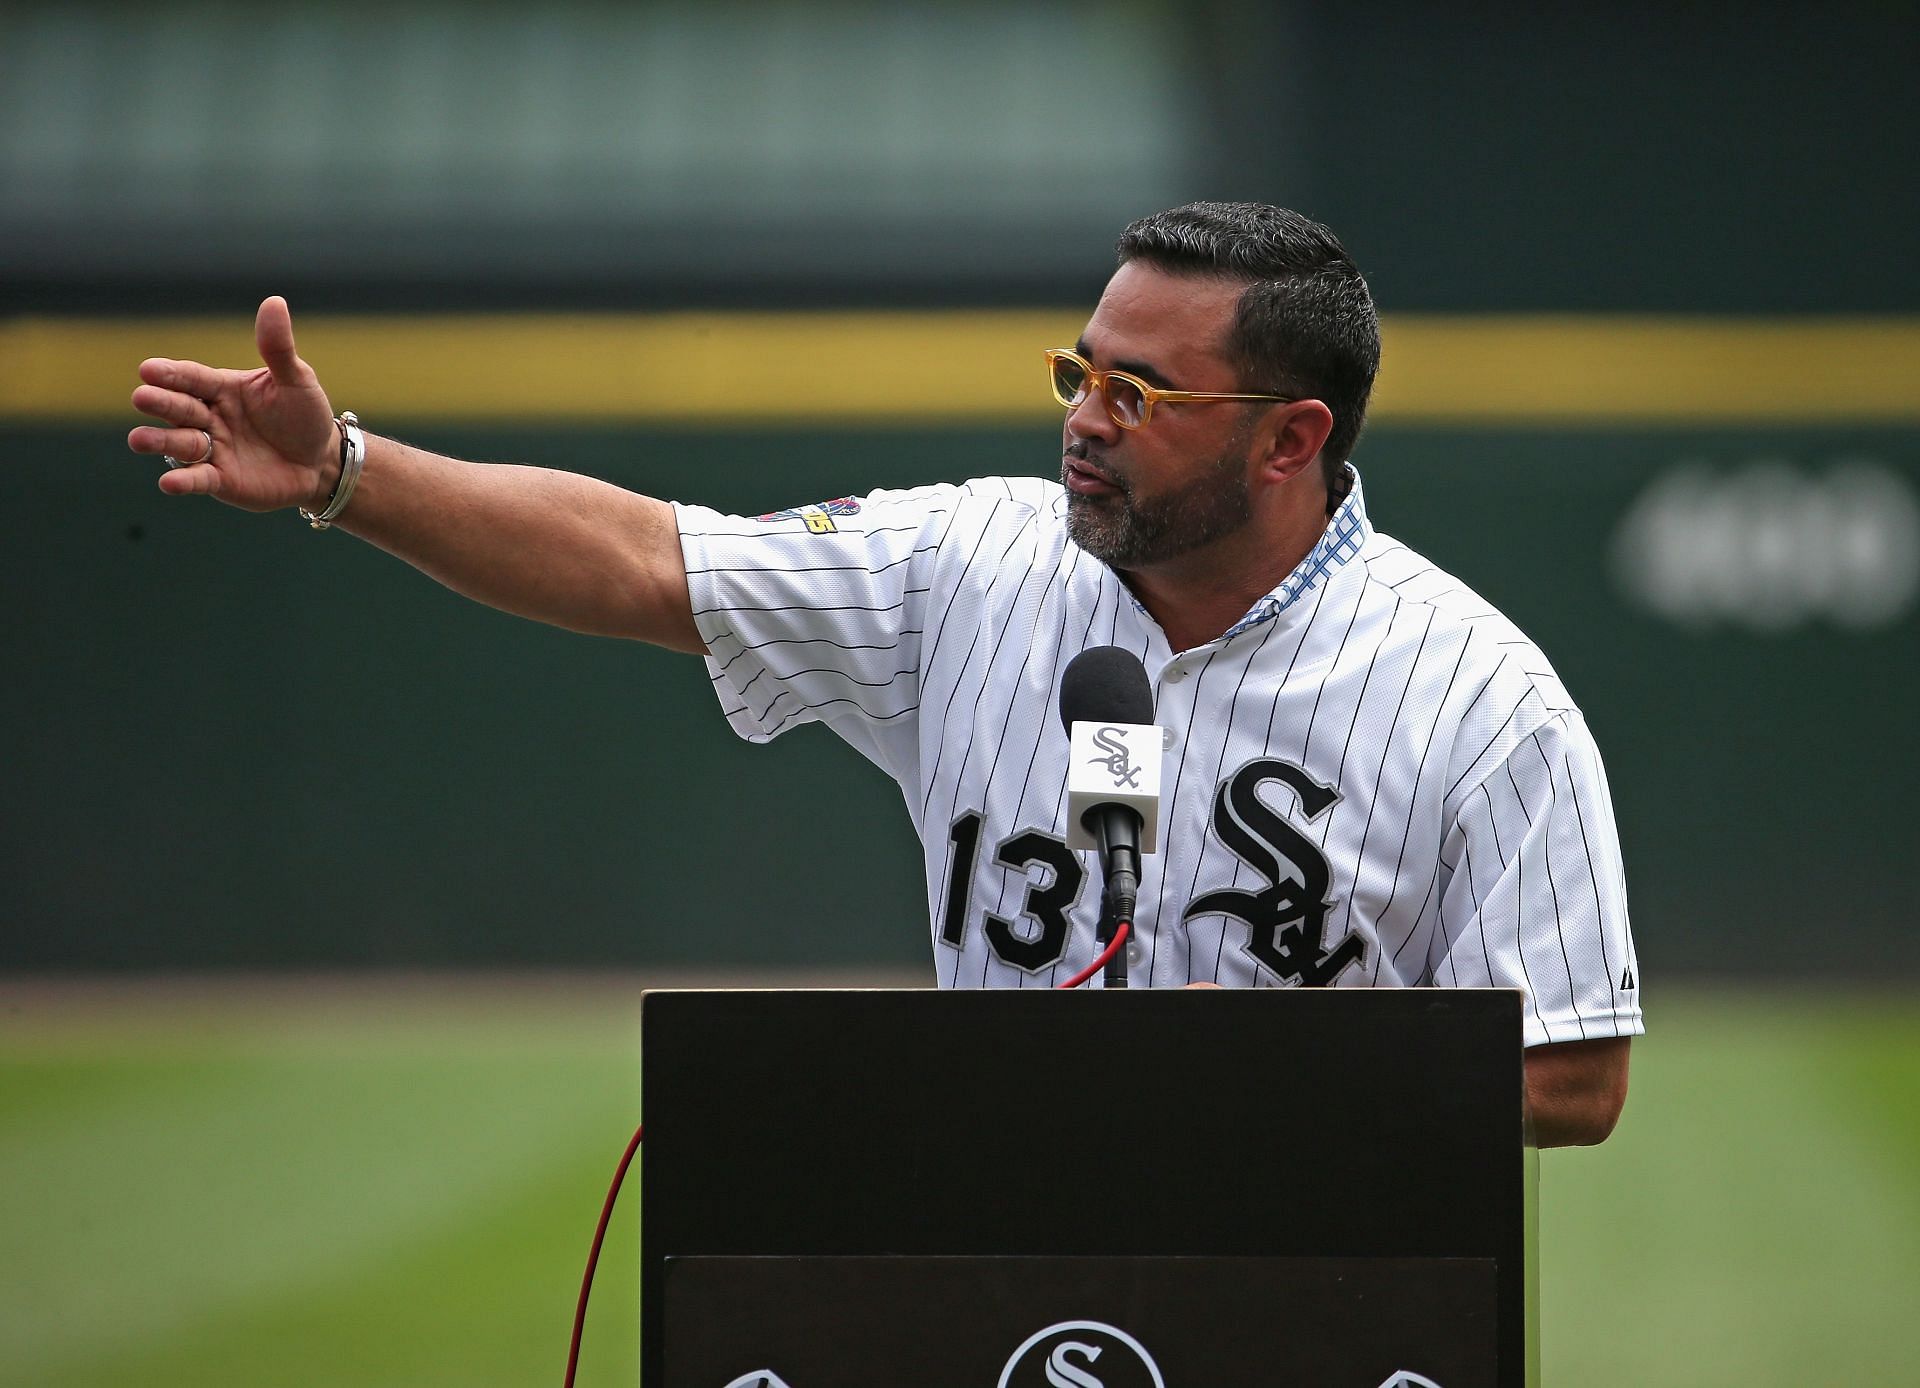 Former manager Ozzie Gullien speaks to the crowd during a ceremony honoring the 10th anniversary of the 2005 WS Champion Chicago White Sox